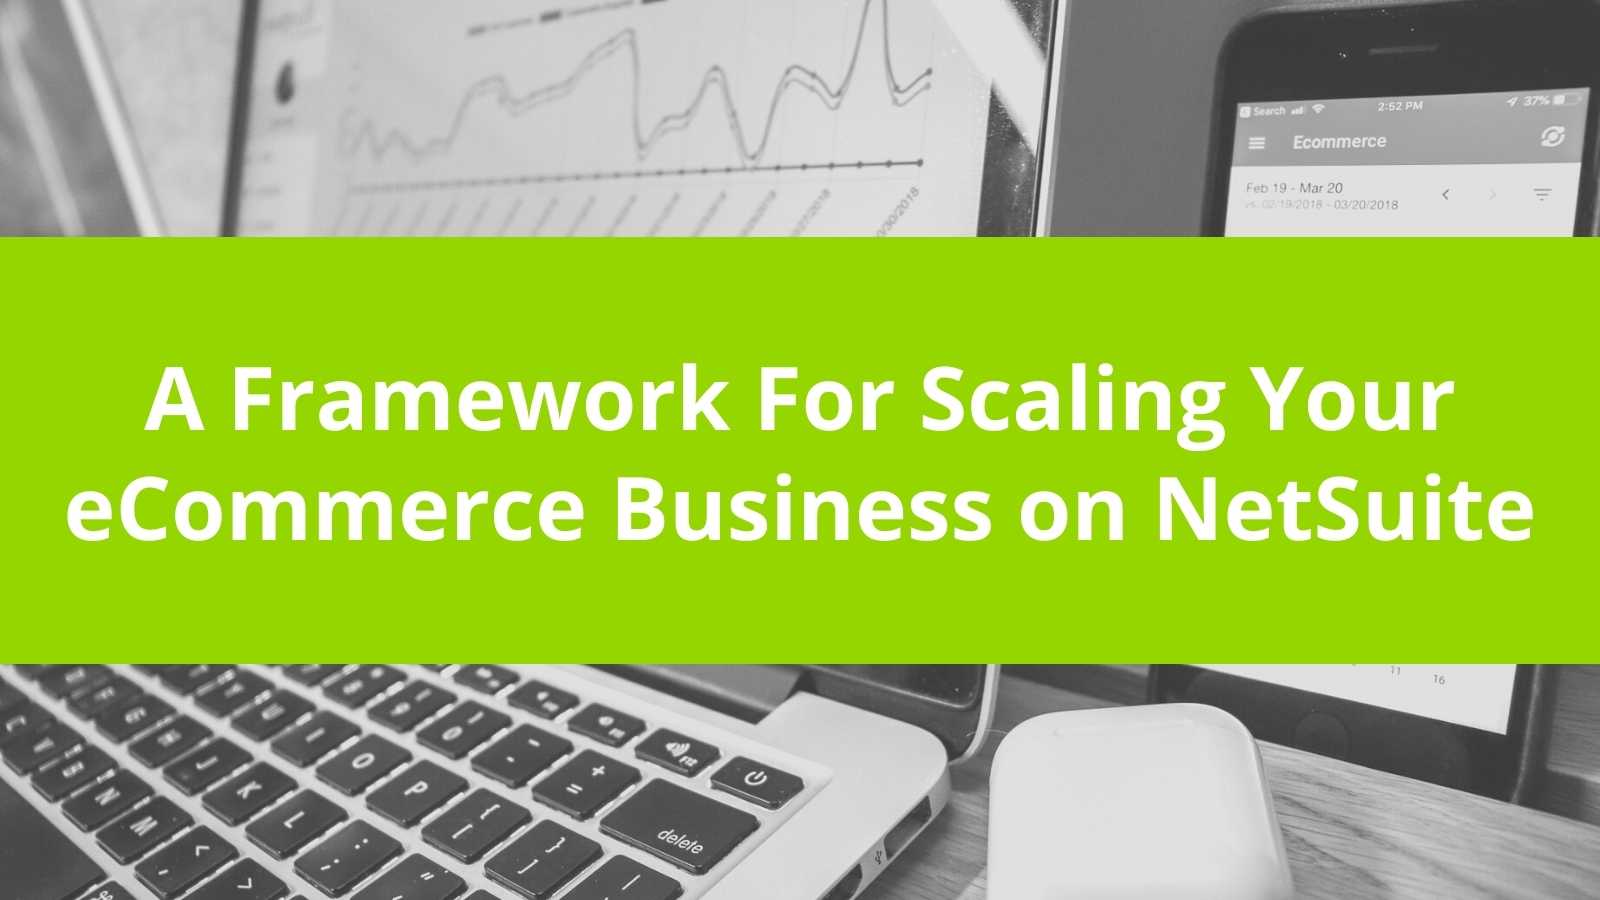 How to Scale your Ecommerce Company on Netsuite